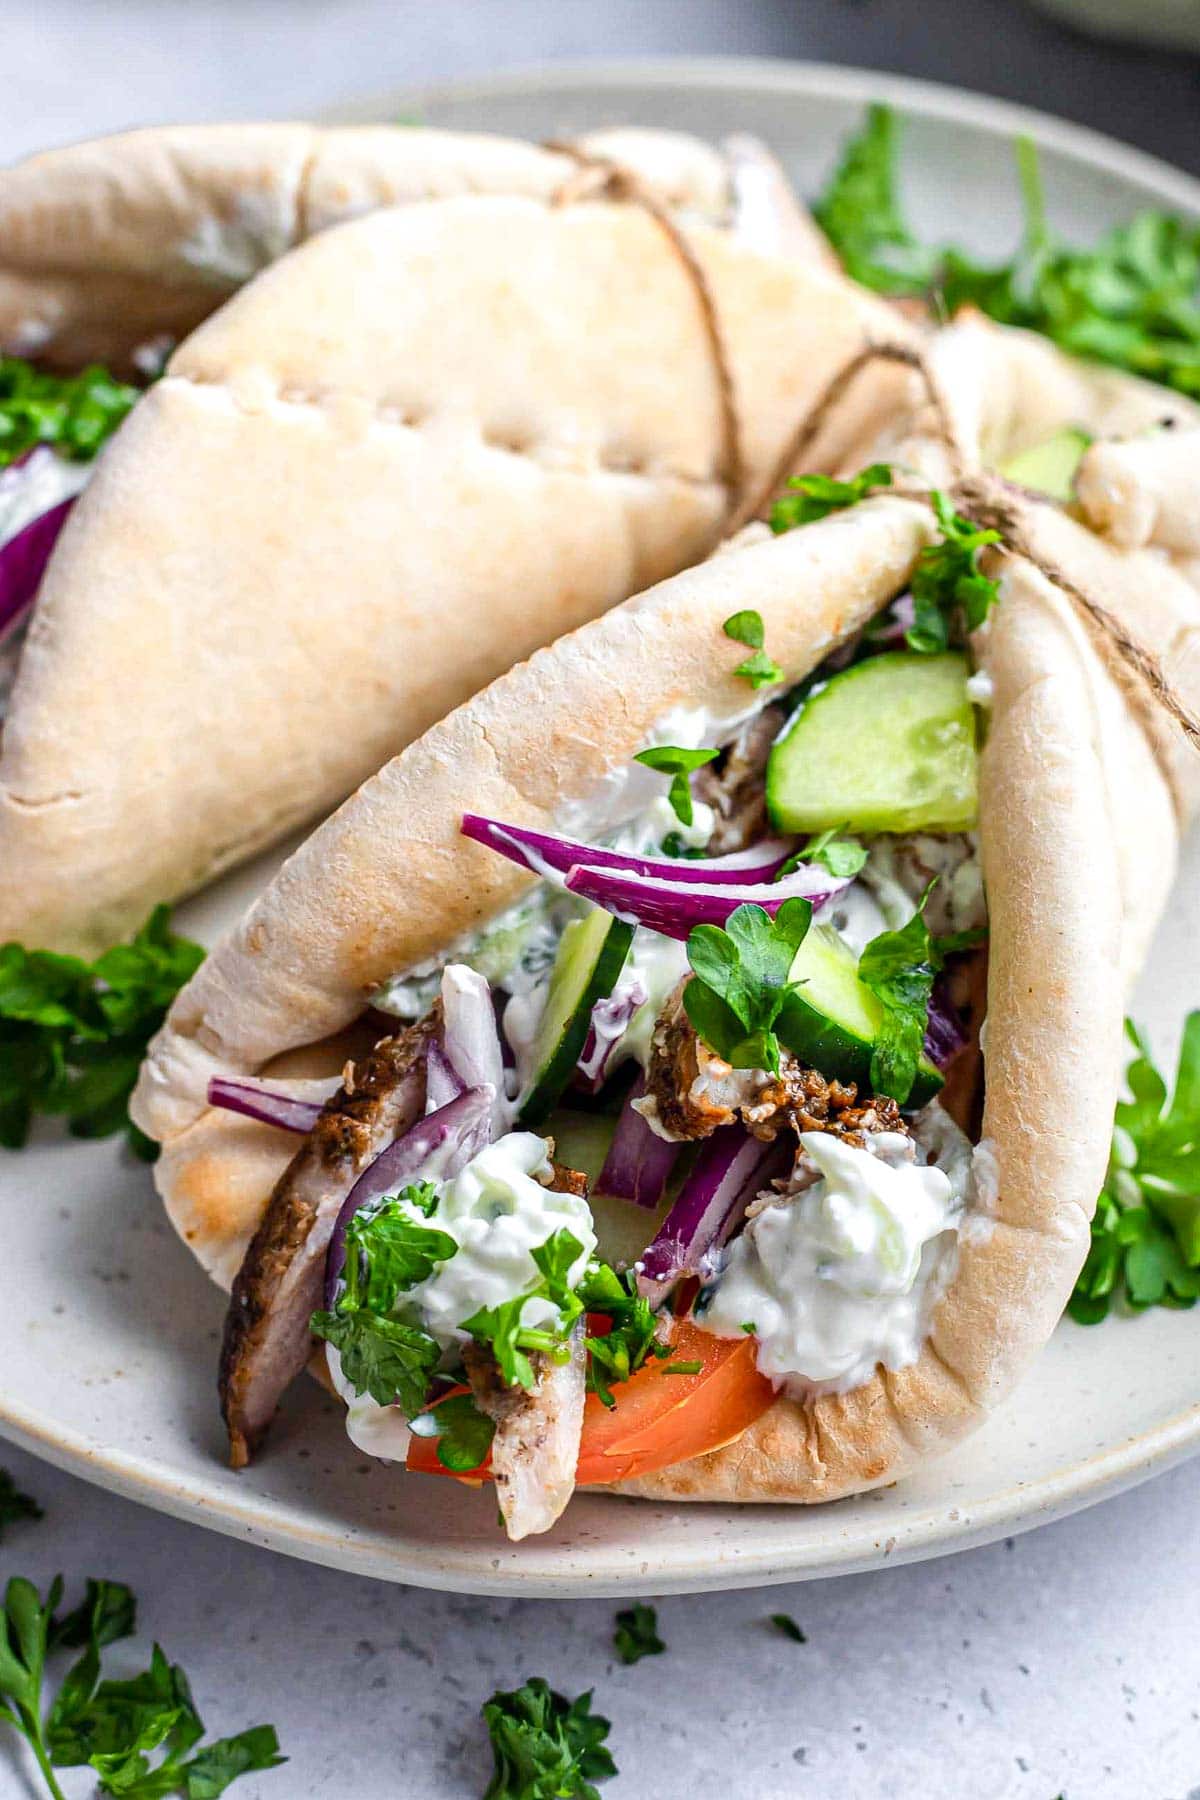 chicken and vegetables wrapped in a pita sitting on a plate.